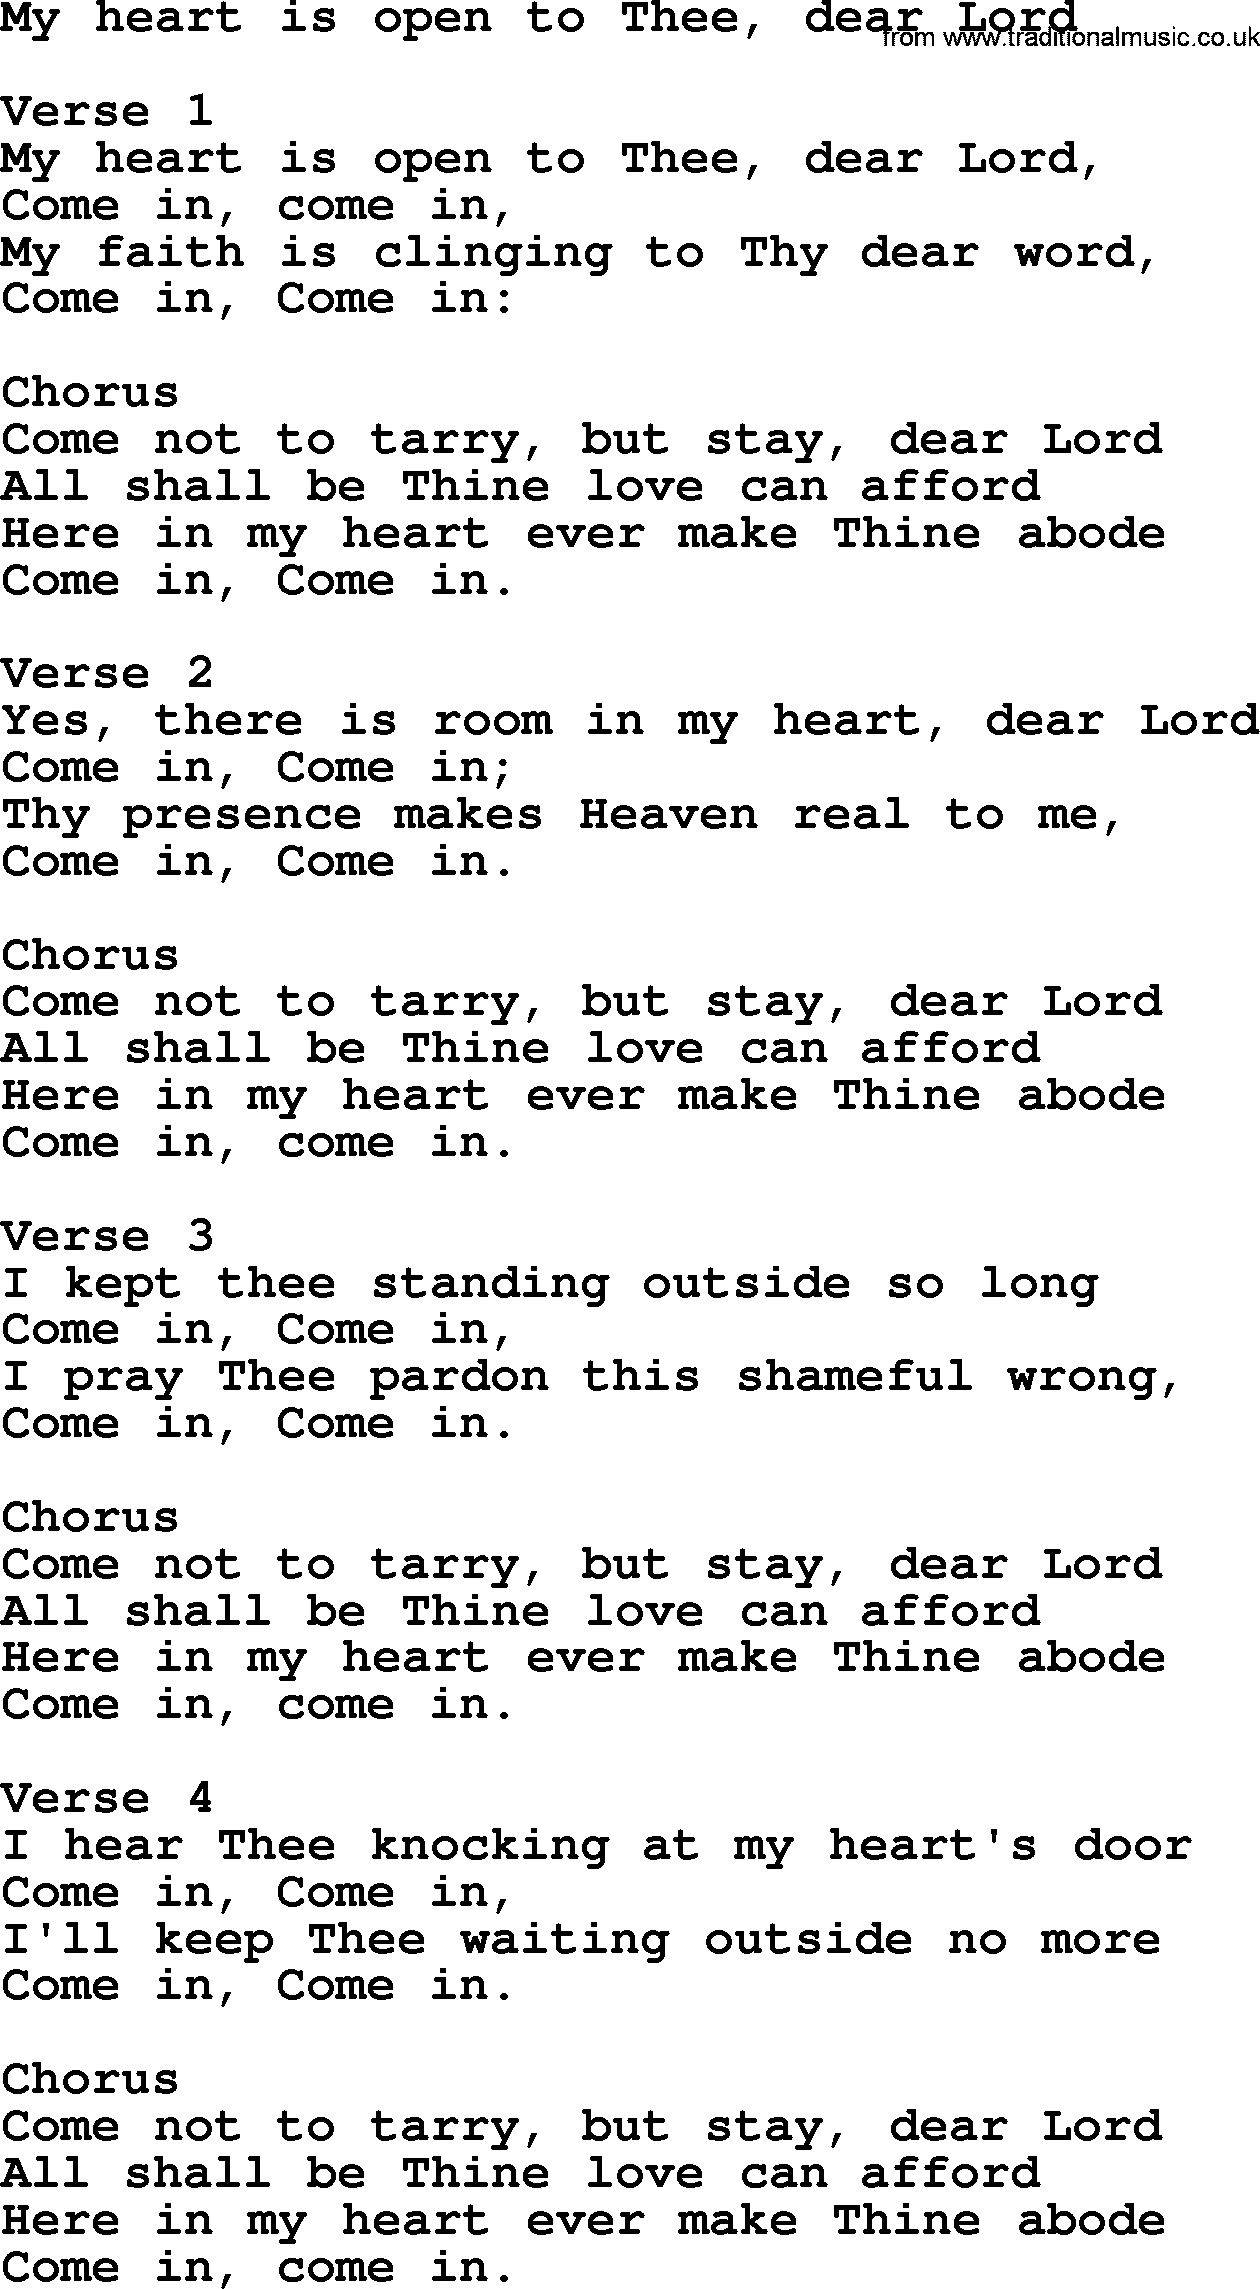 Apostolic and Pentecostal Hymns and Gospel Songs, Hymn: My Heart Is Open To Thee, Dear Lord, Christian lyrics and PDF